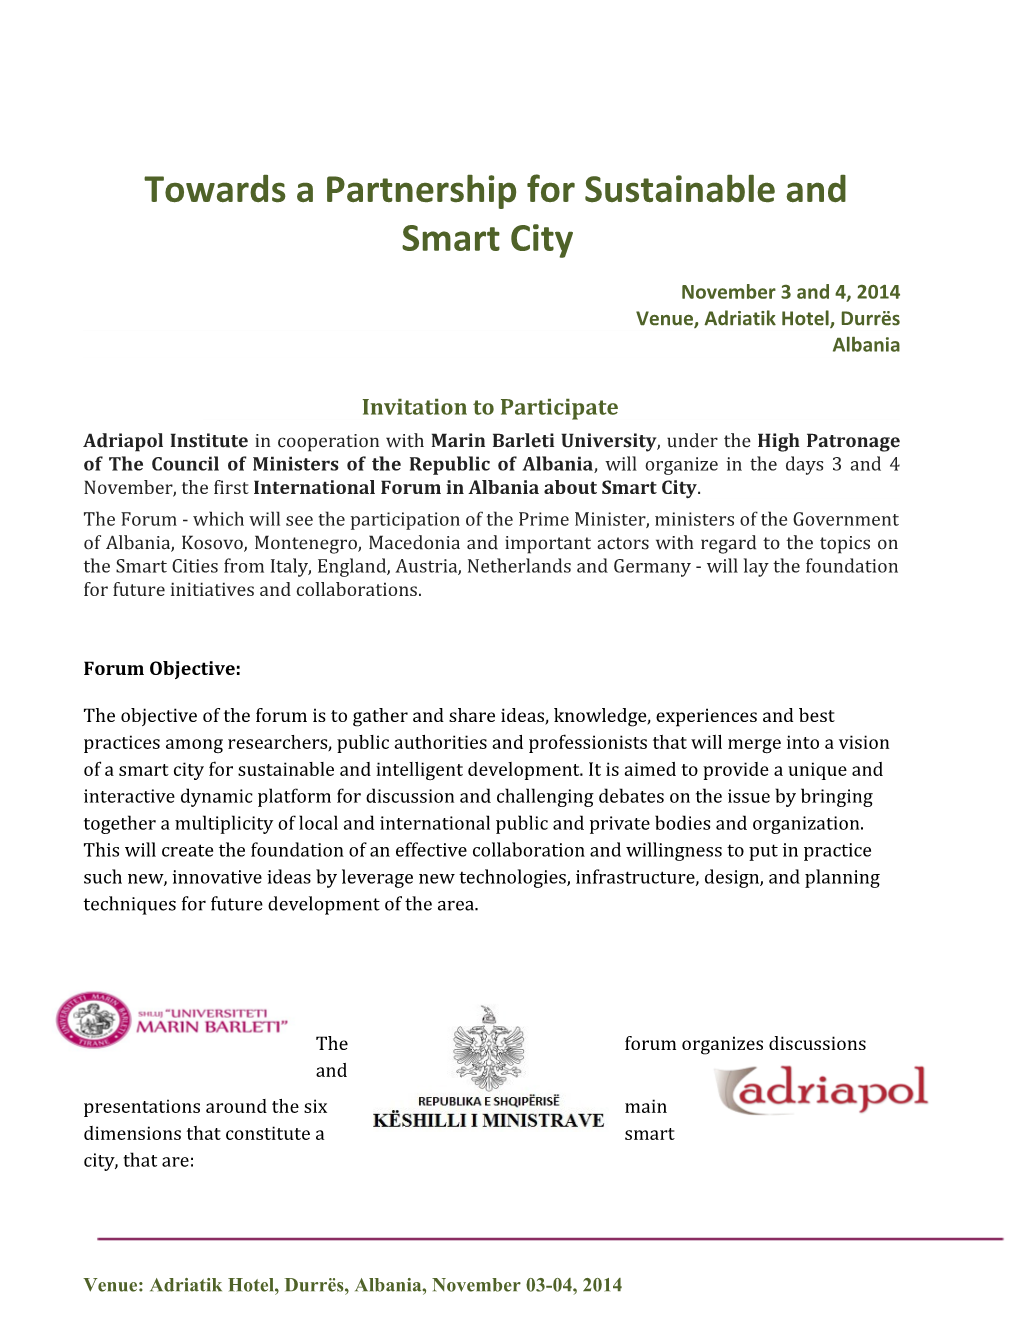 Towards a Partnership for Sustainable and Smart City